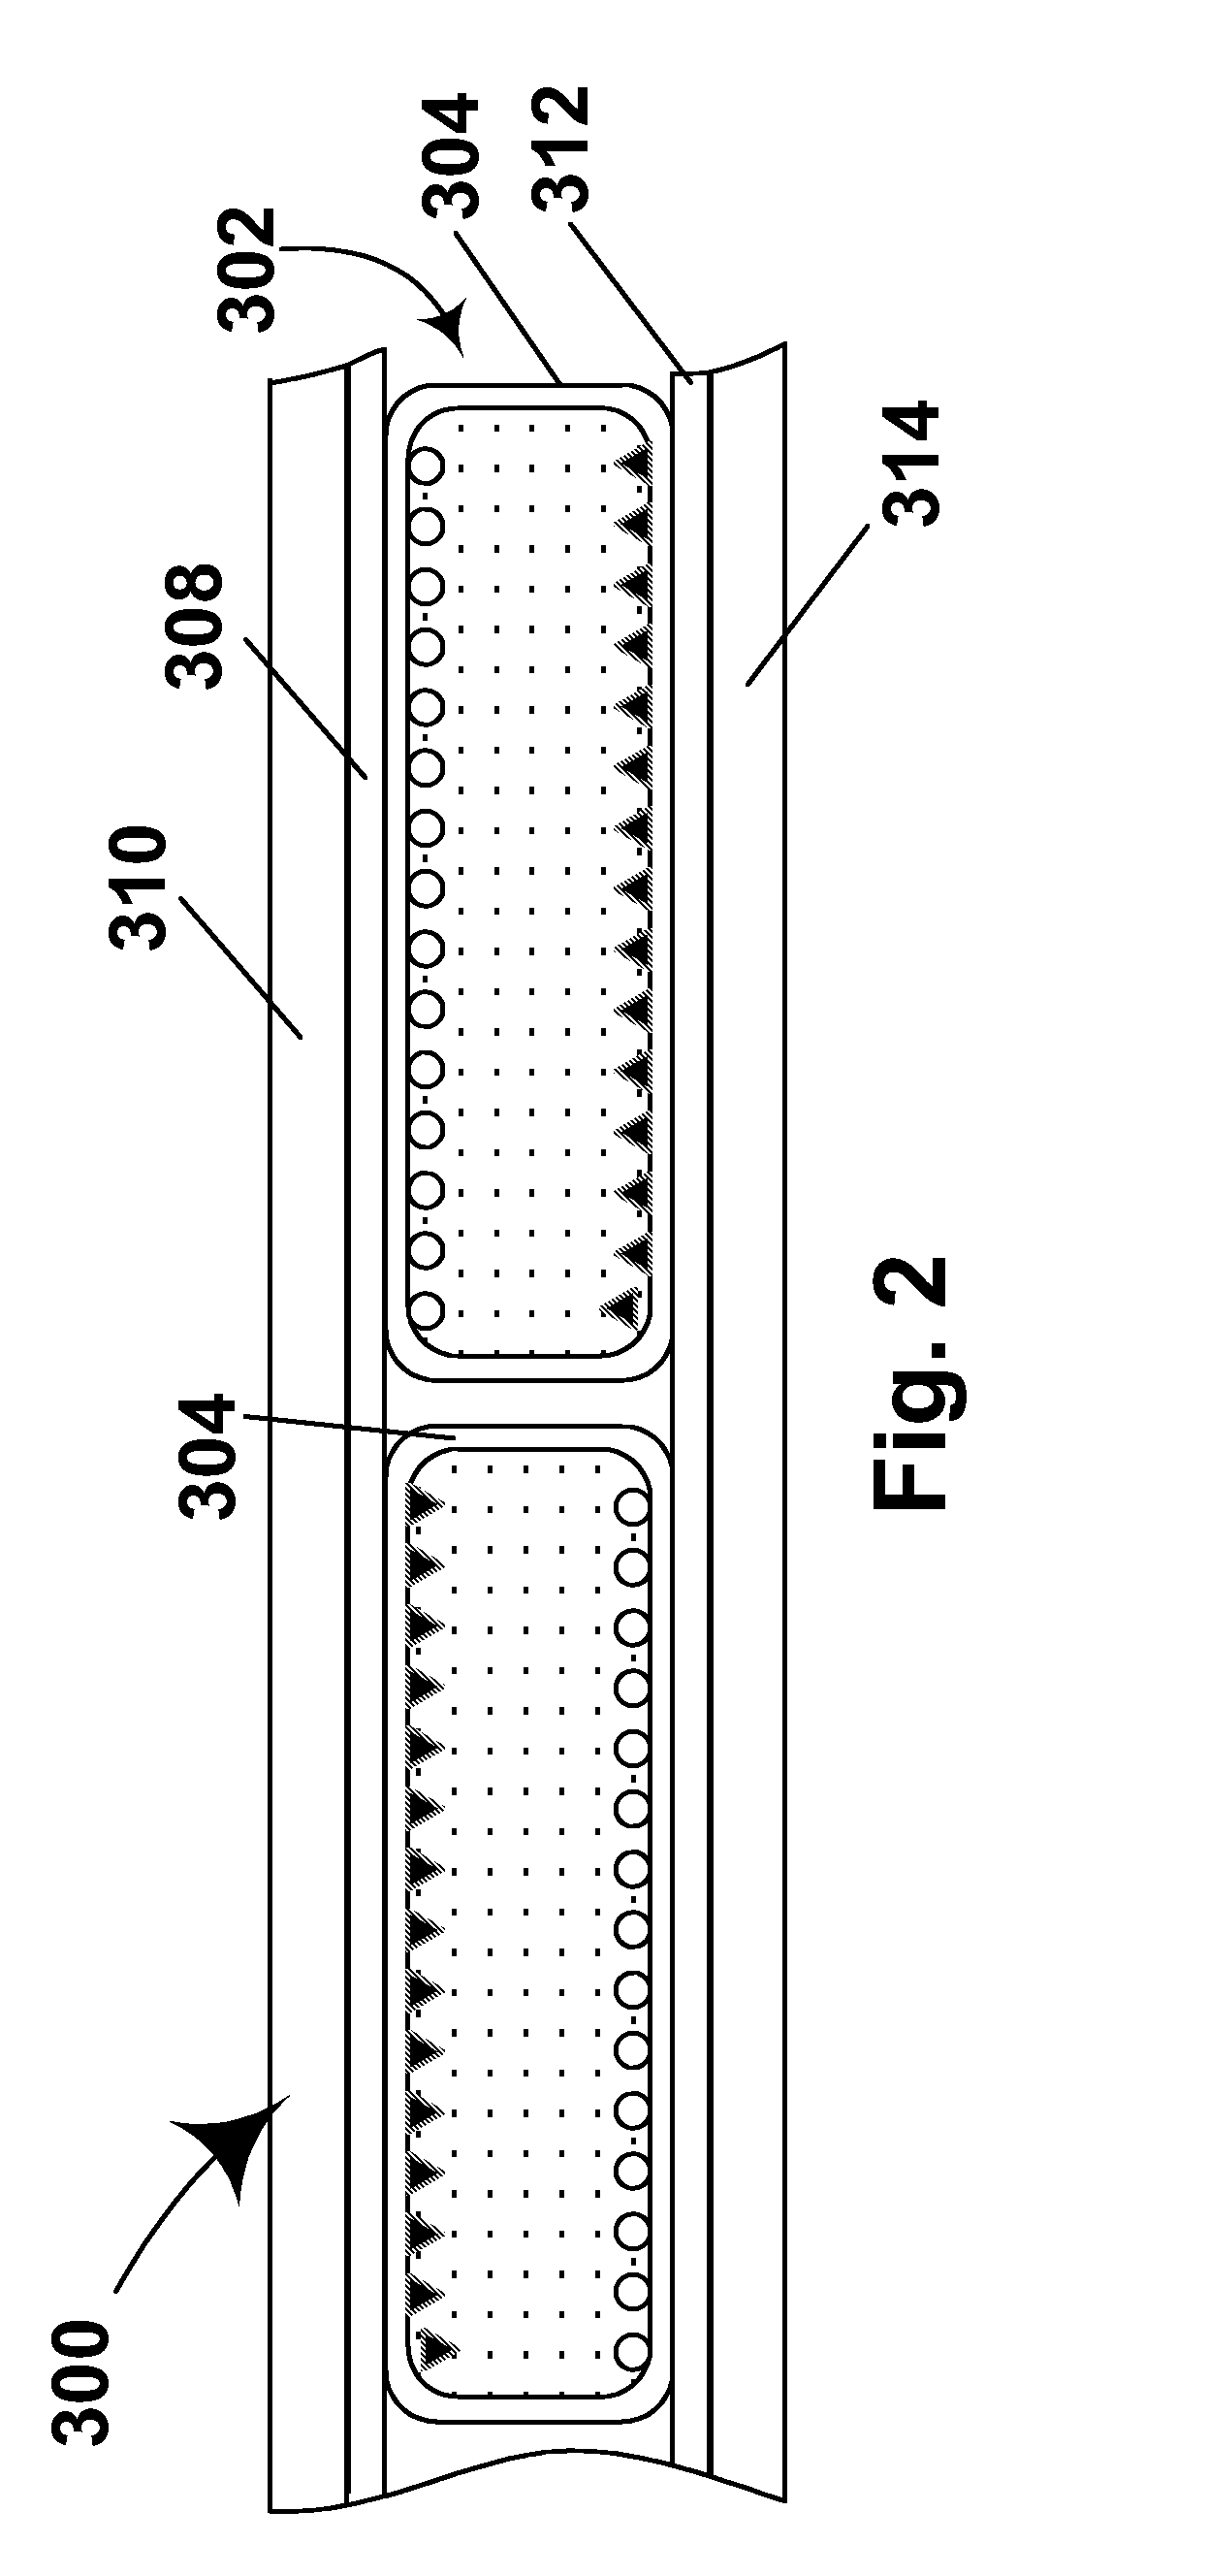 Electro-optic display and lamination adhesive for use therein